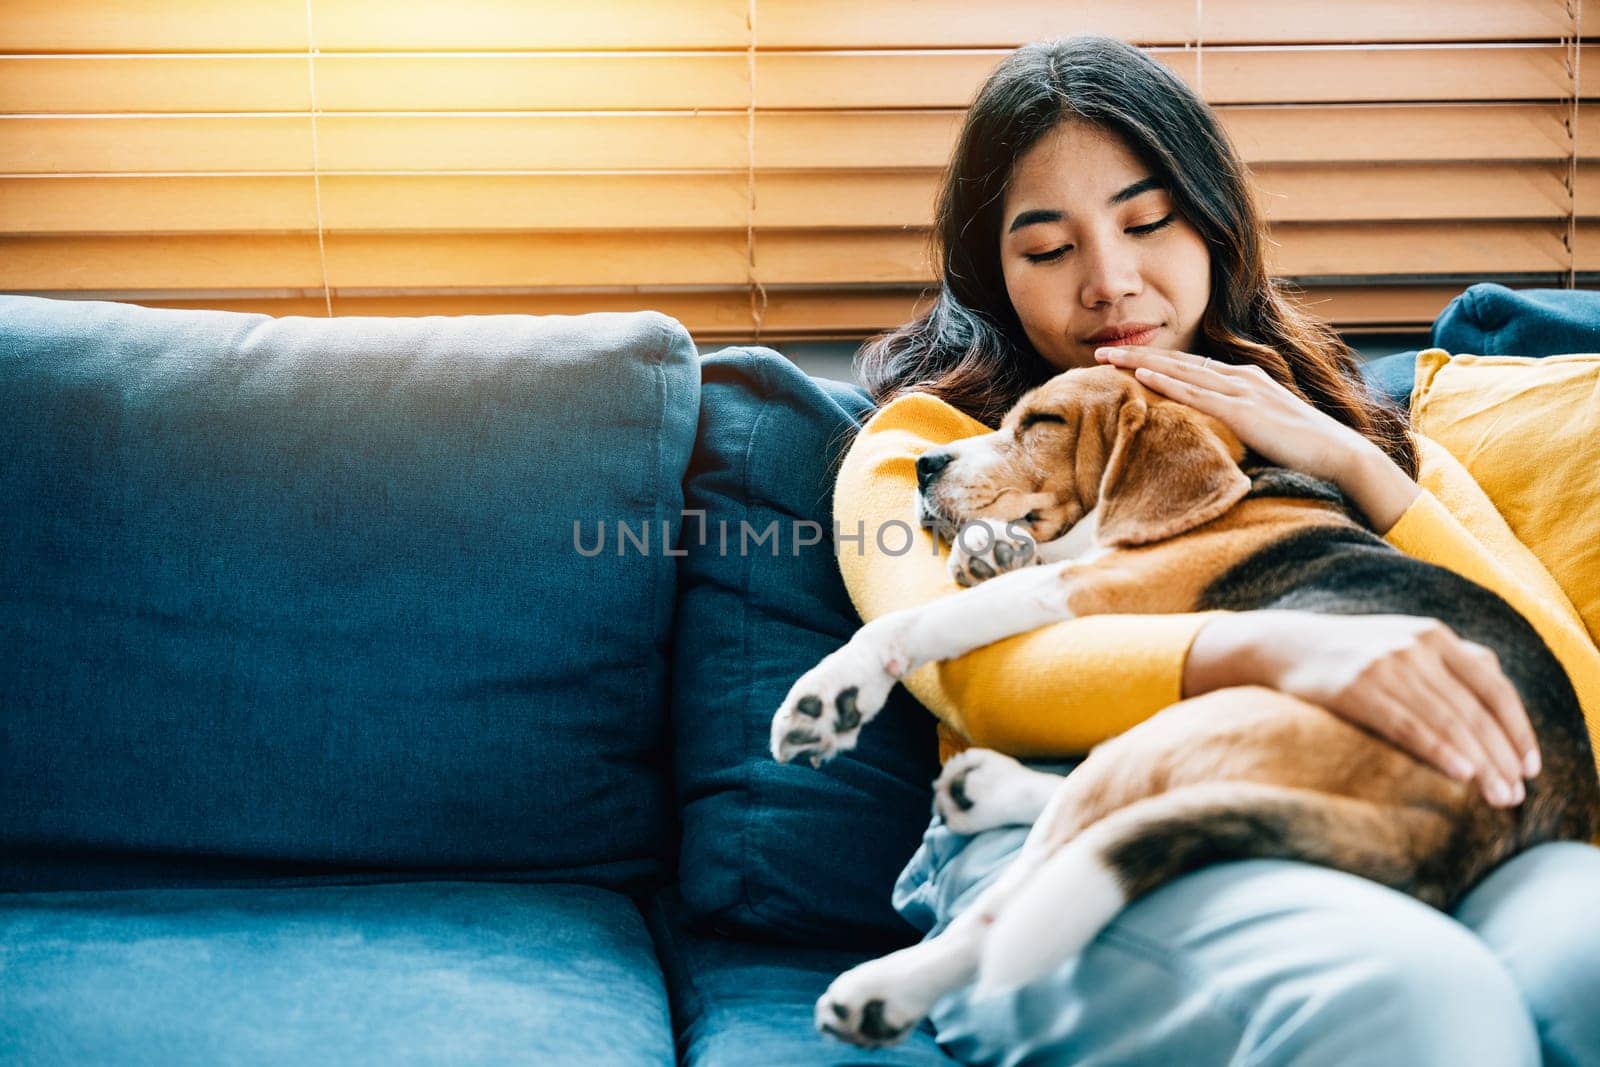 In their living room, an Asian woman and her Beagle puppy enjoy a nap on the sofa, showcasing their friendship, trust, and the joy of togetherness. It's a heartwarming portrait of love. Pet love by Sorapop